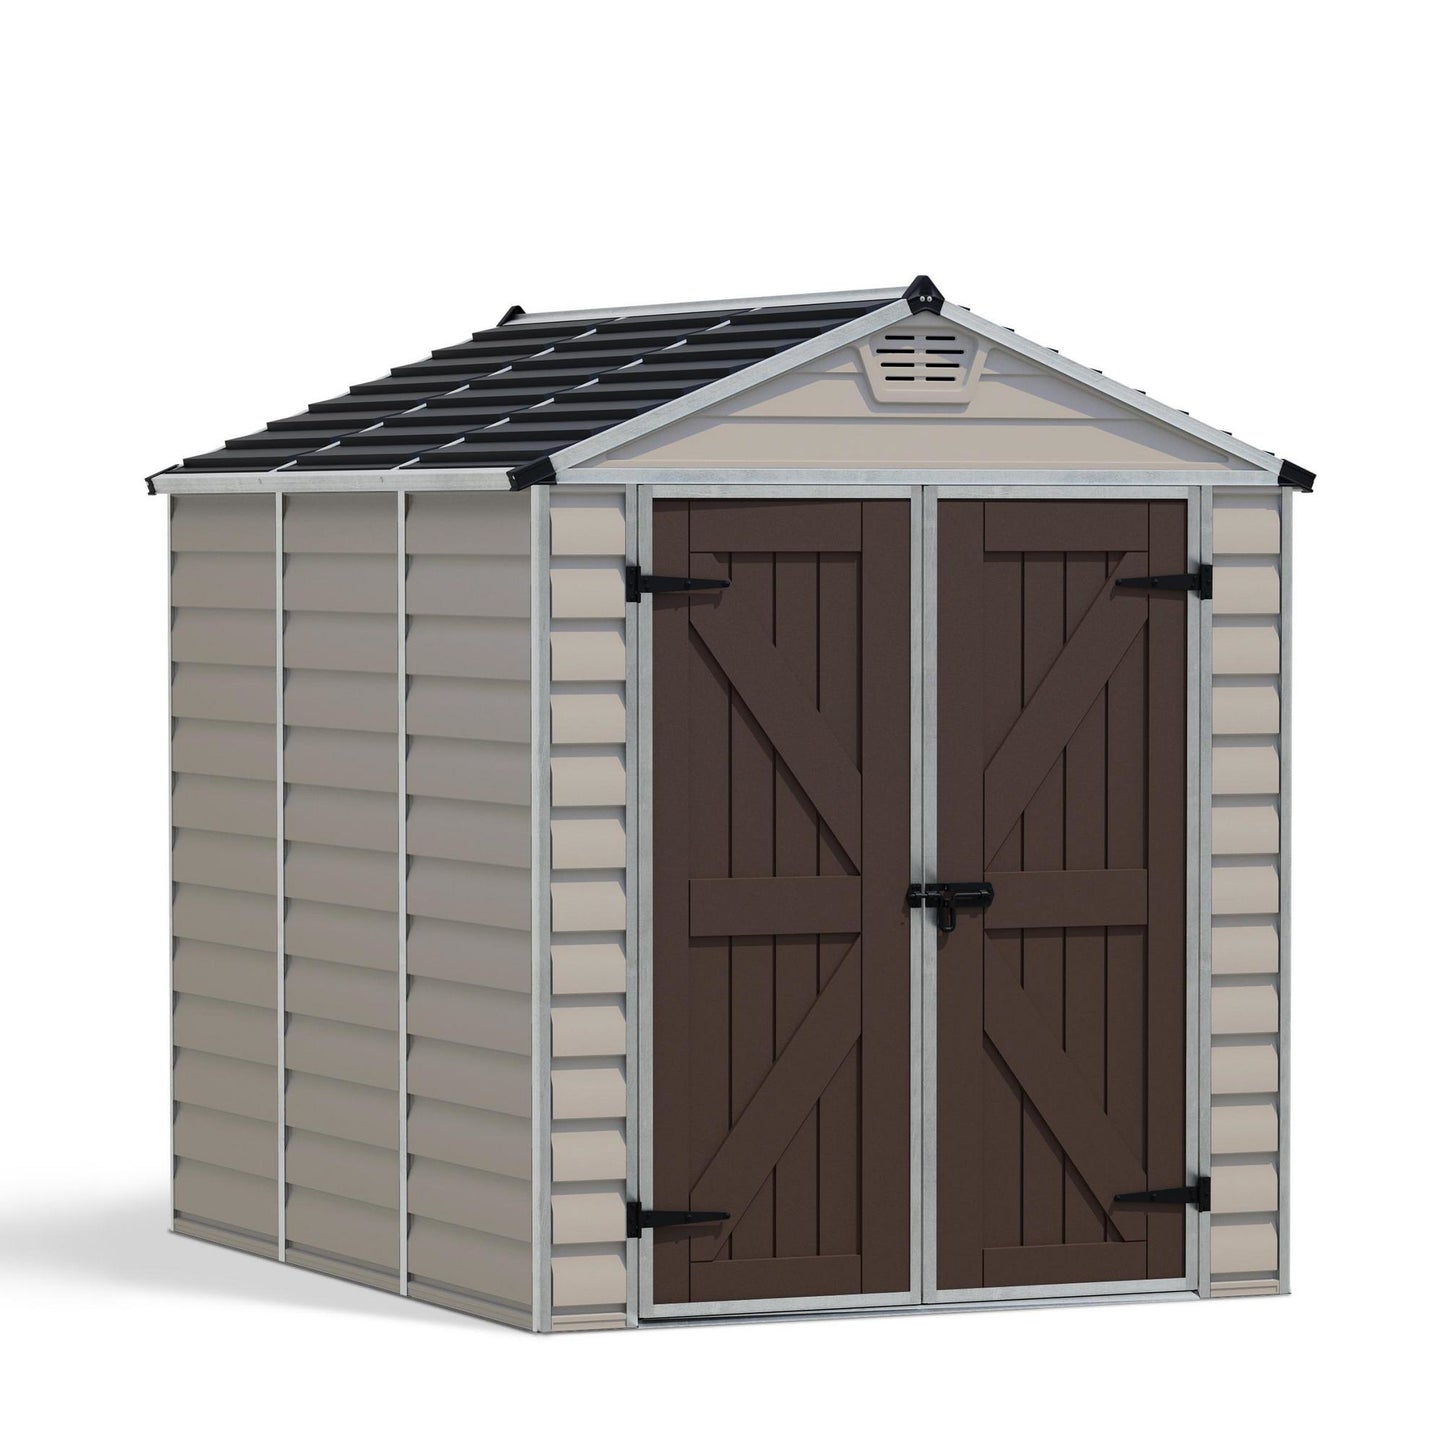 Canopia by Palram 6 x 8 Skylight Shed - Tan